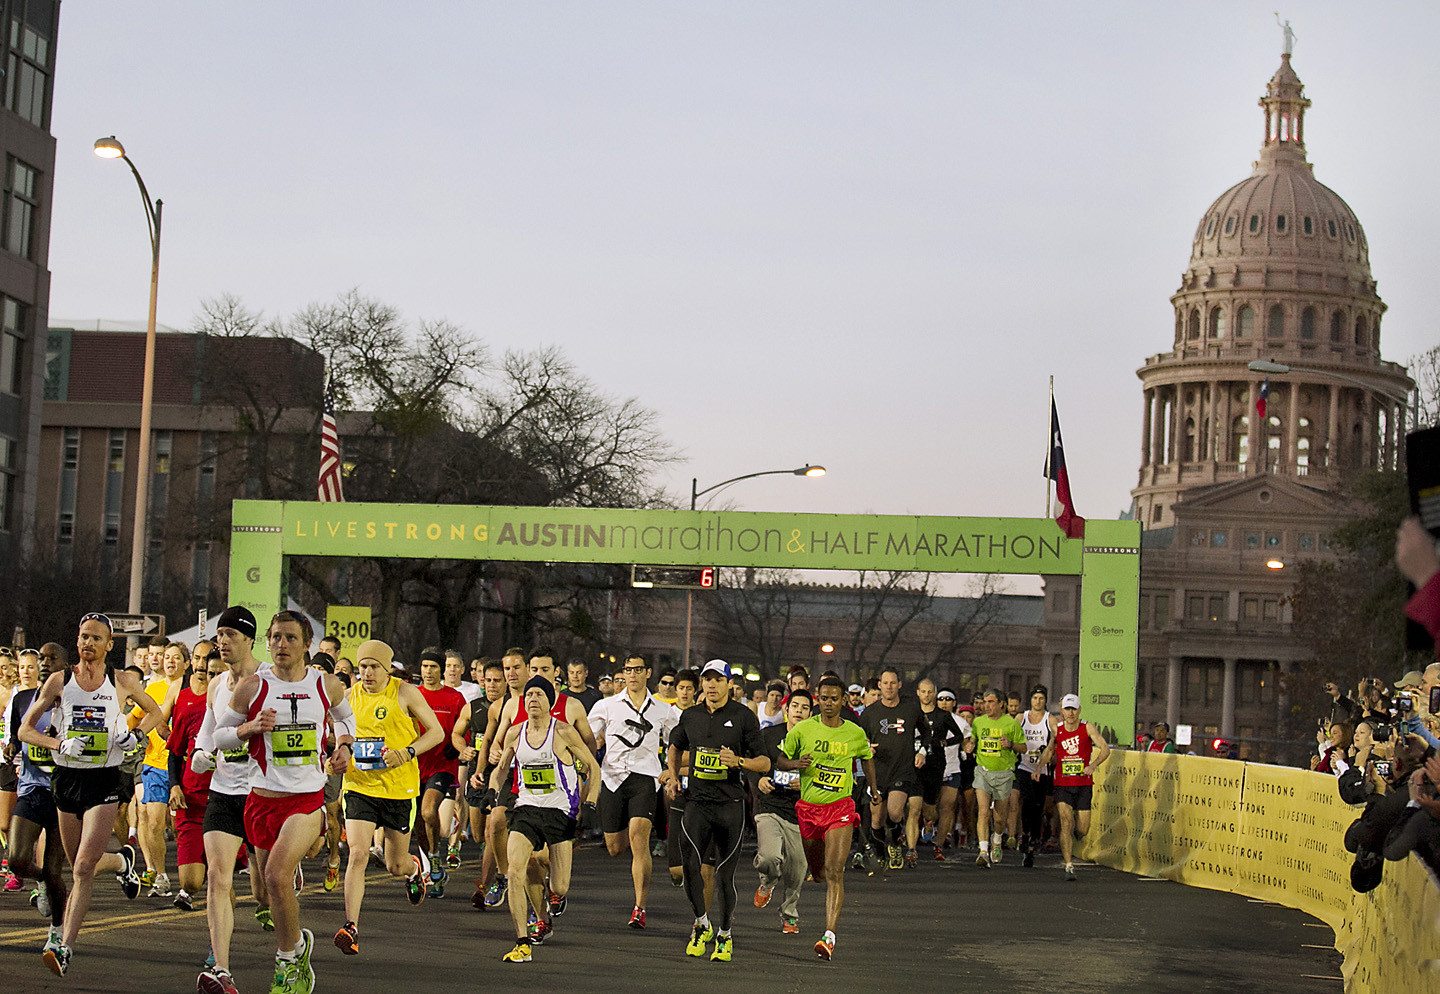 Camp Gladiator will be a new partner for the 28th annual Austin Marathon